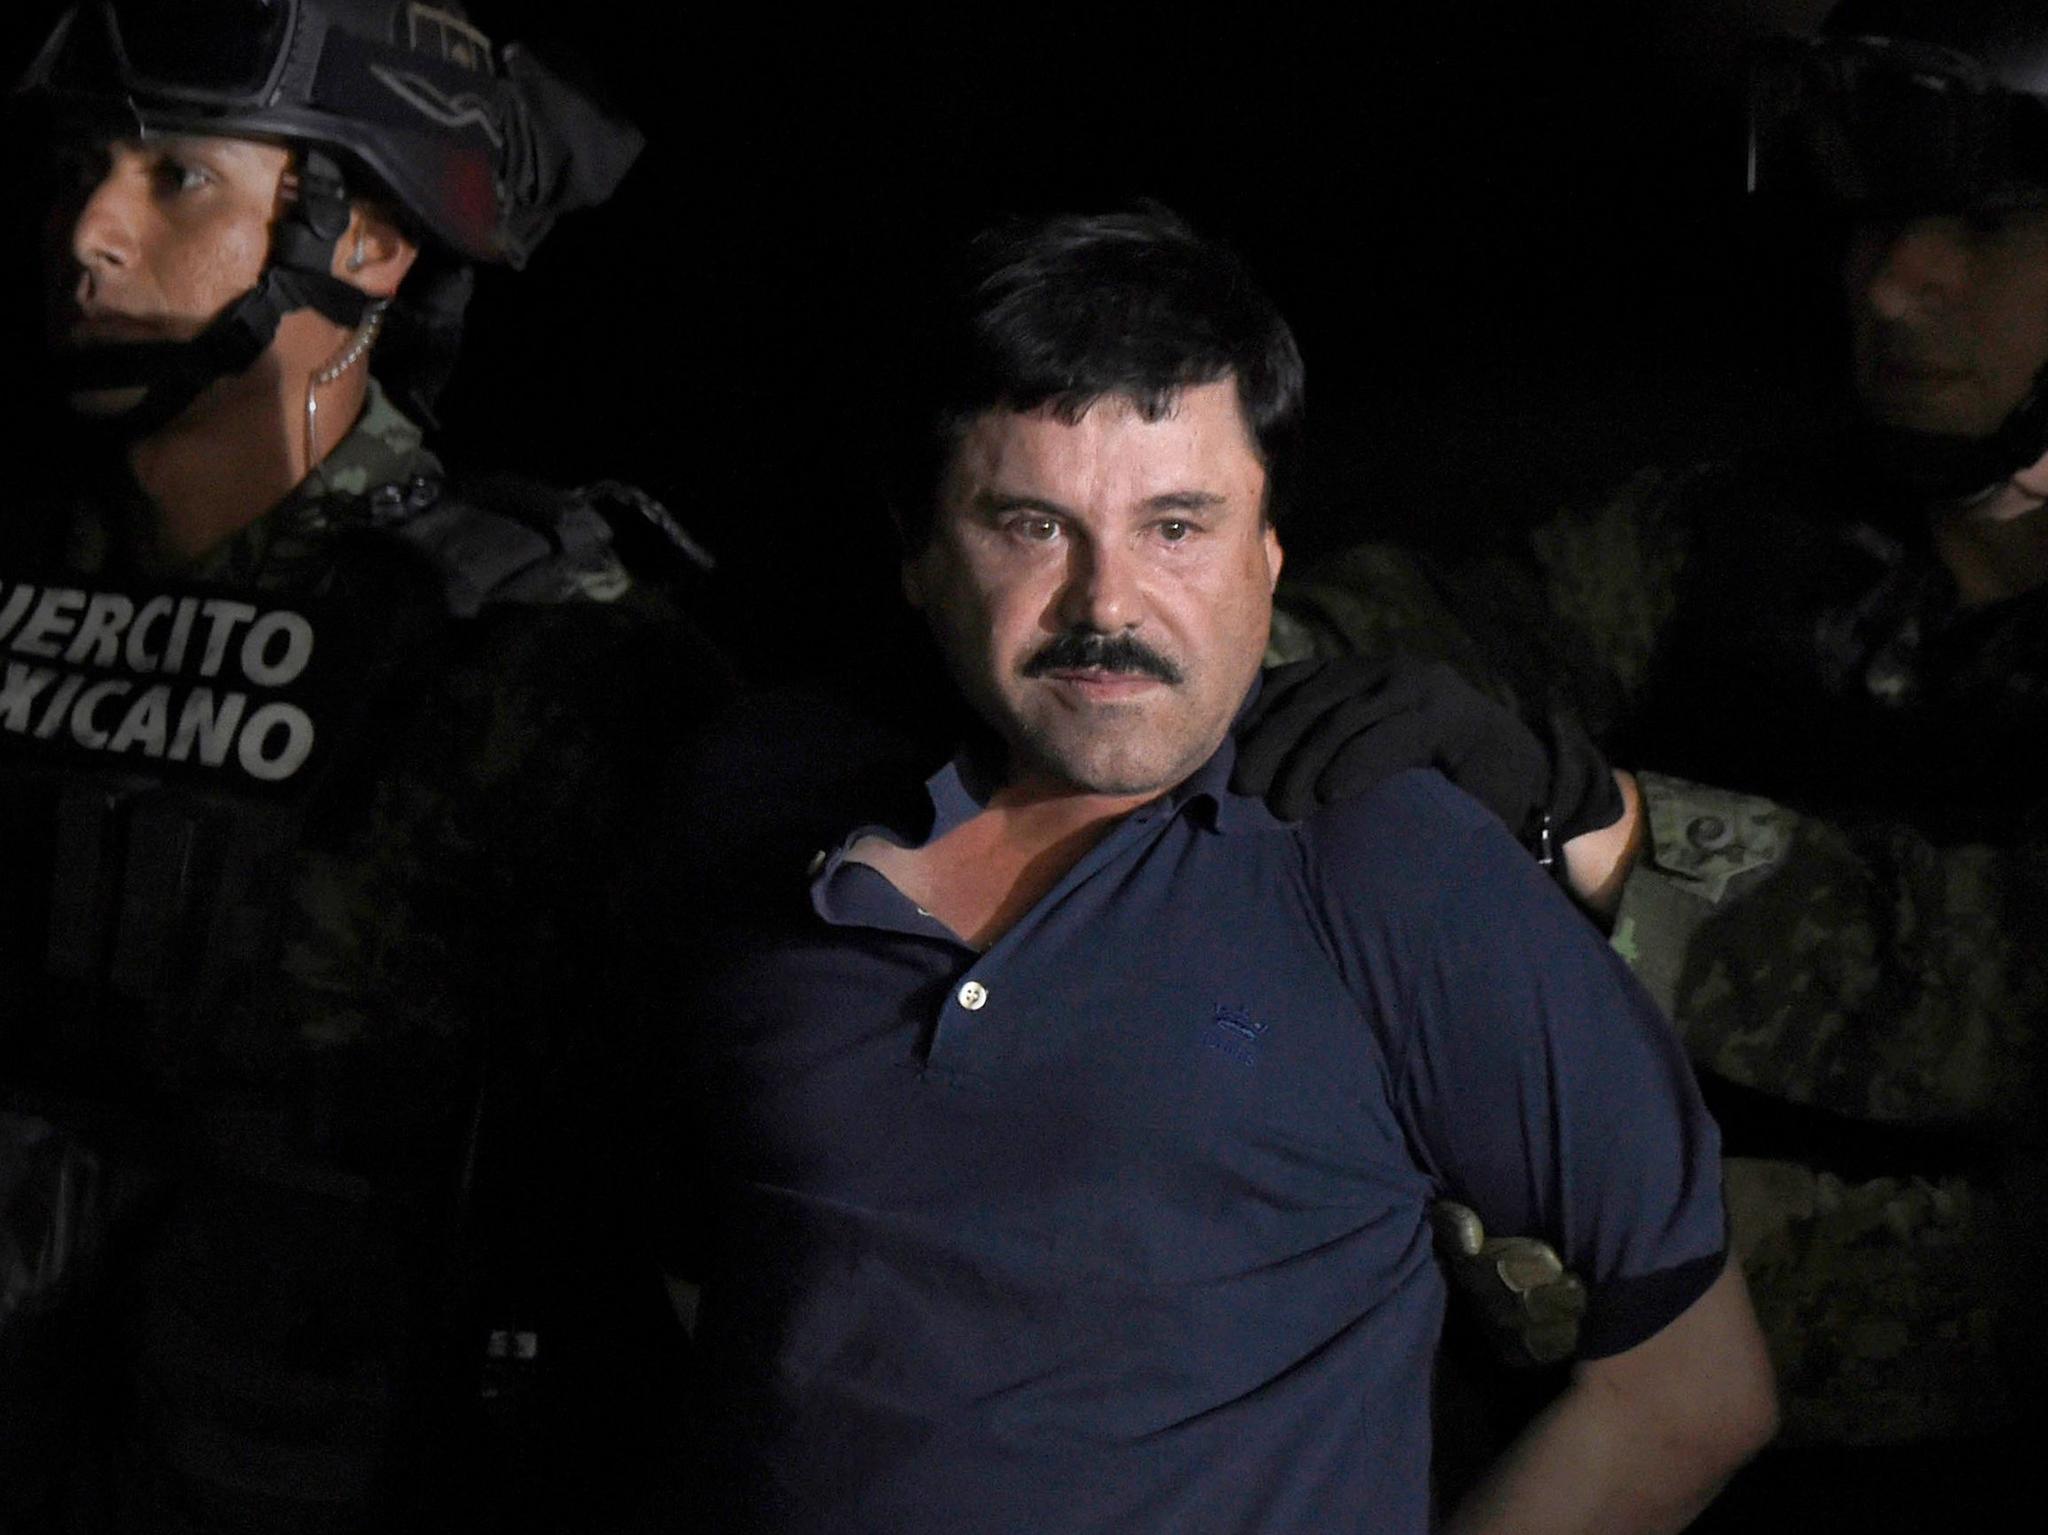 New York at a standstill for El Chapo in chains | The Australian